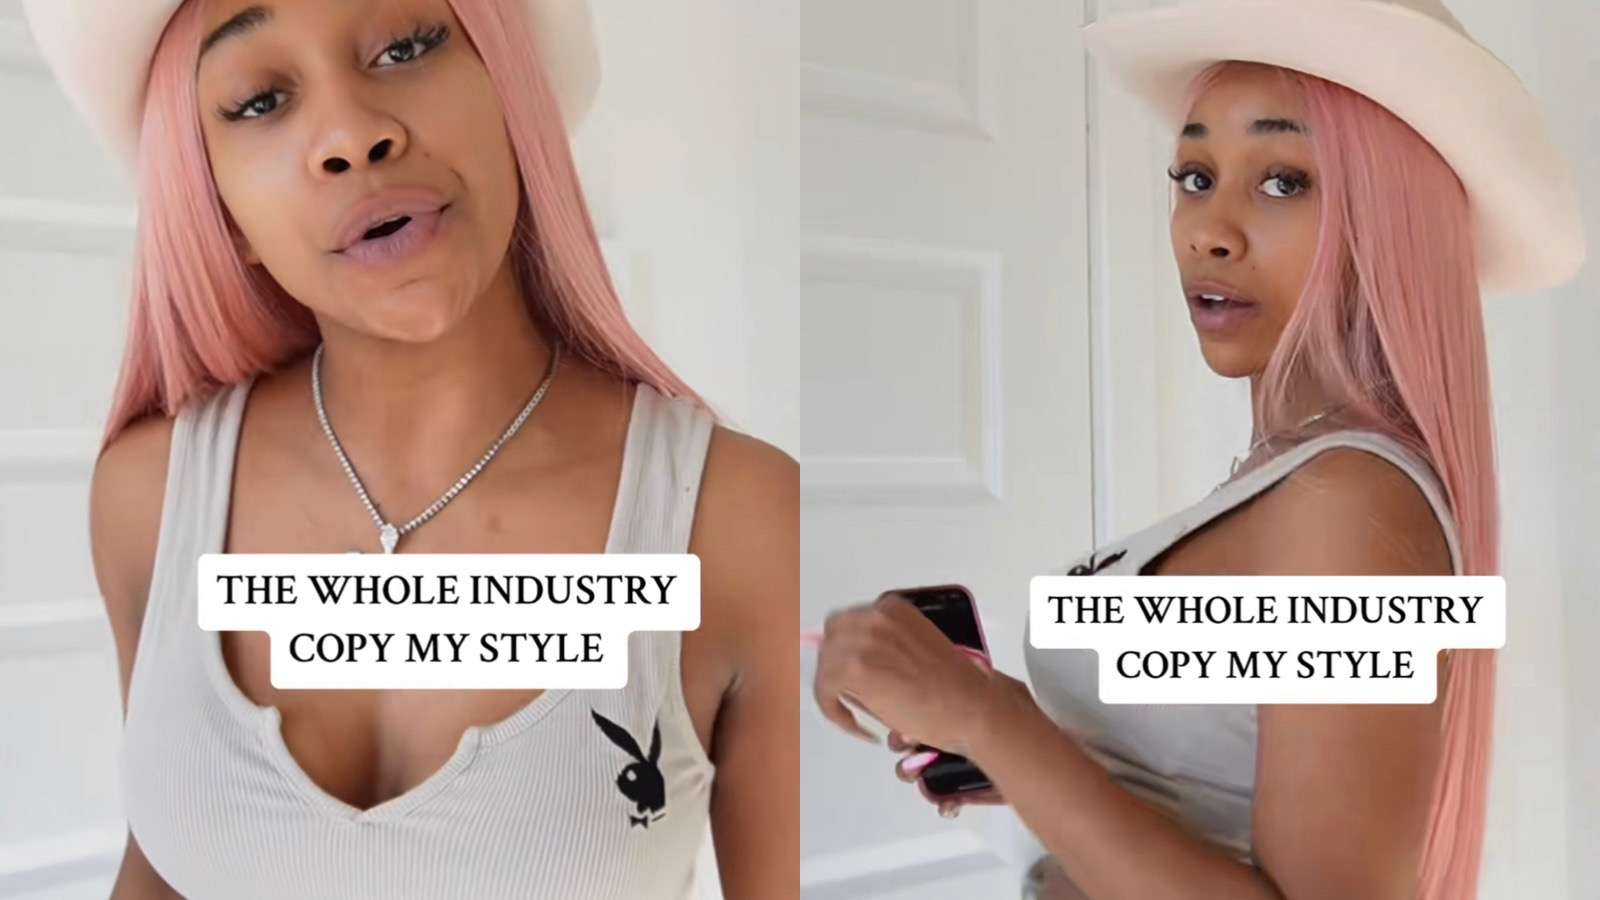 pinkydoll says industry is copying her